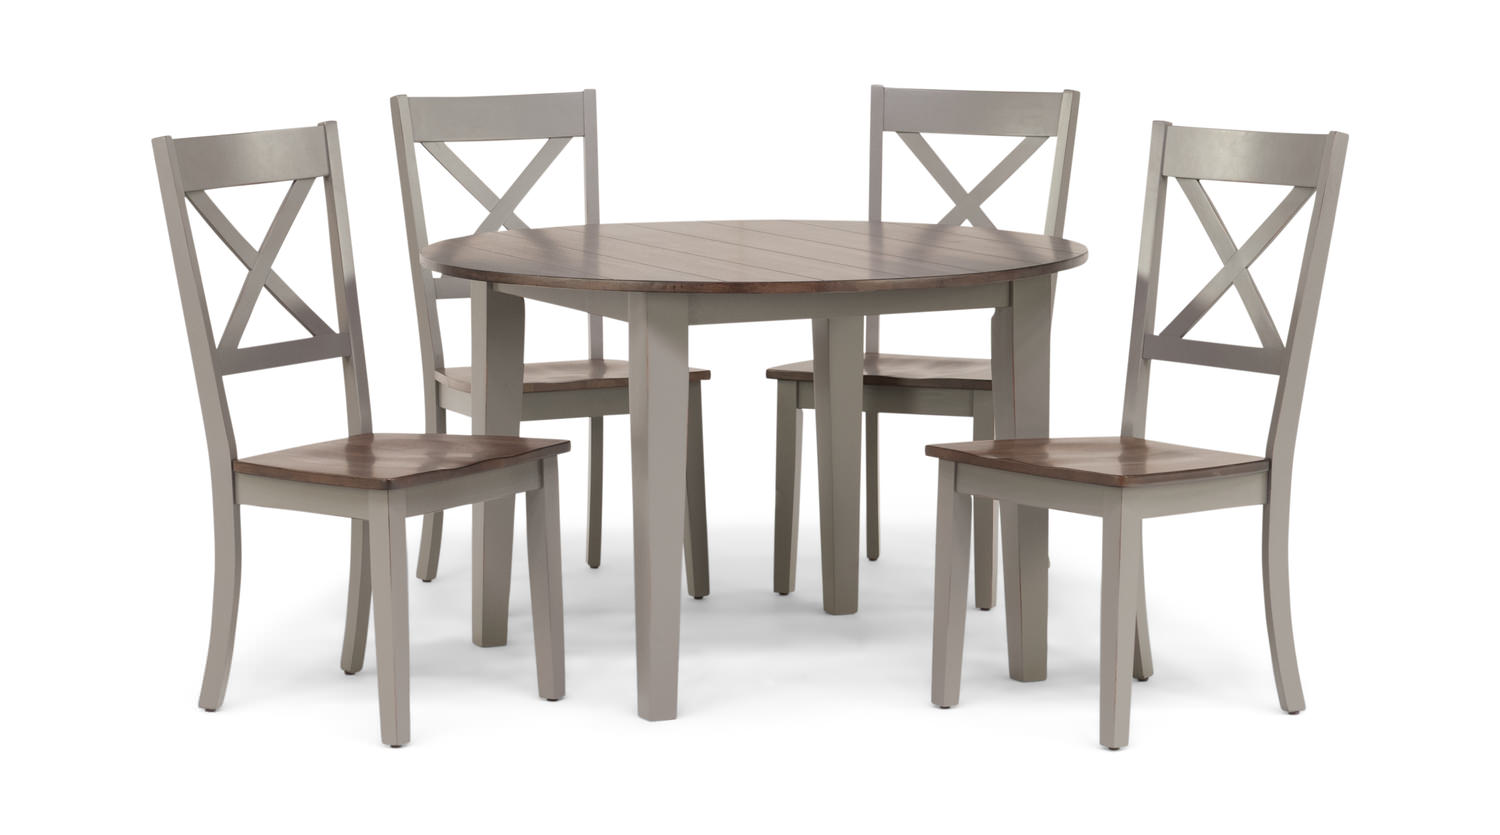 A La Carte Round Table And 4 Chairs Hom Furniture